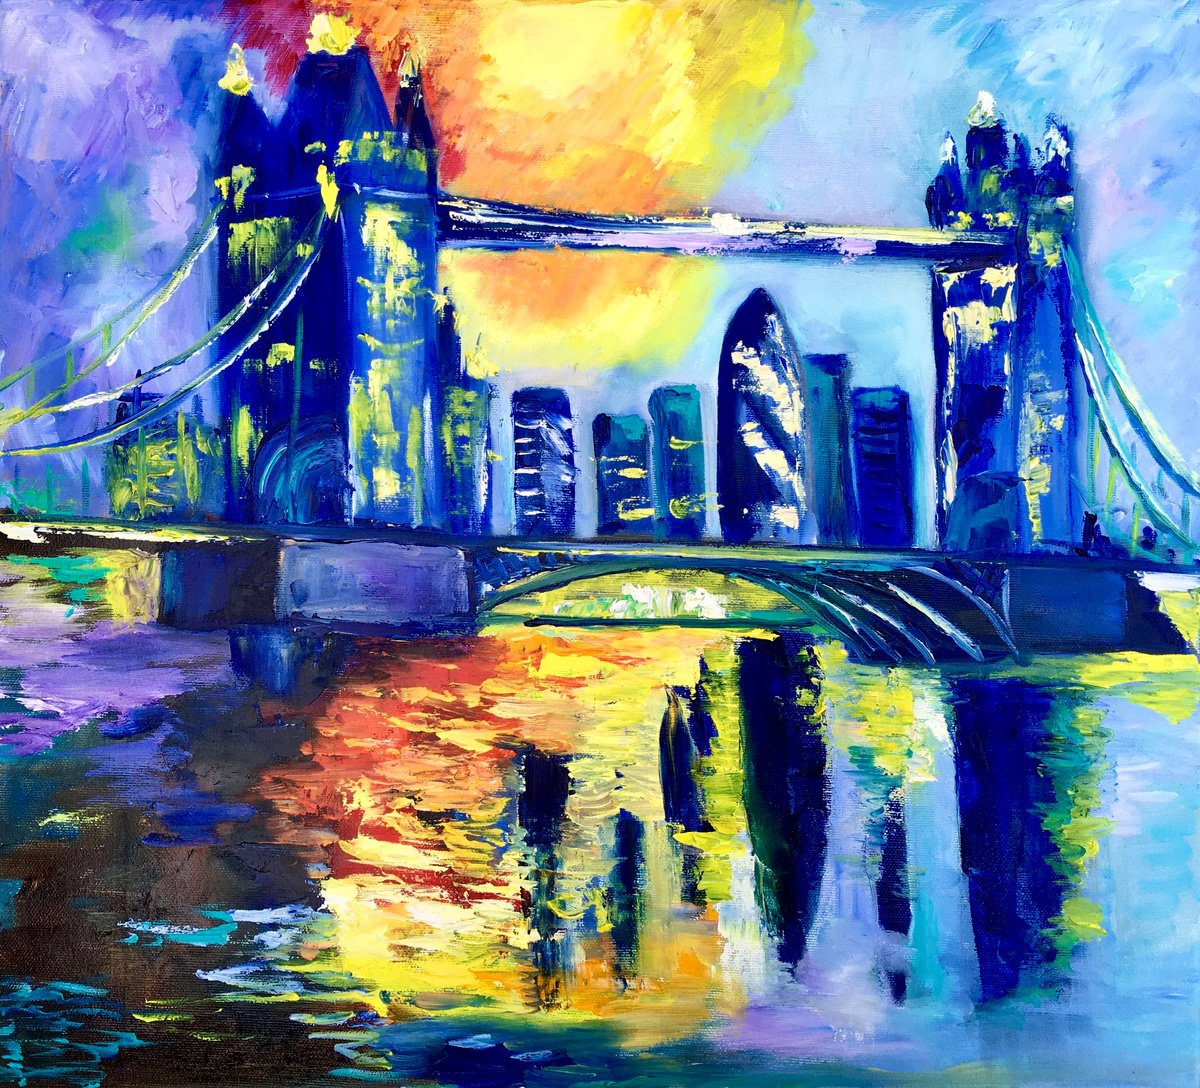 London night, Tower bridge, impressionism.City of London, River Thames, water reflections by Olga Koval